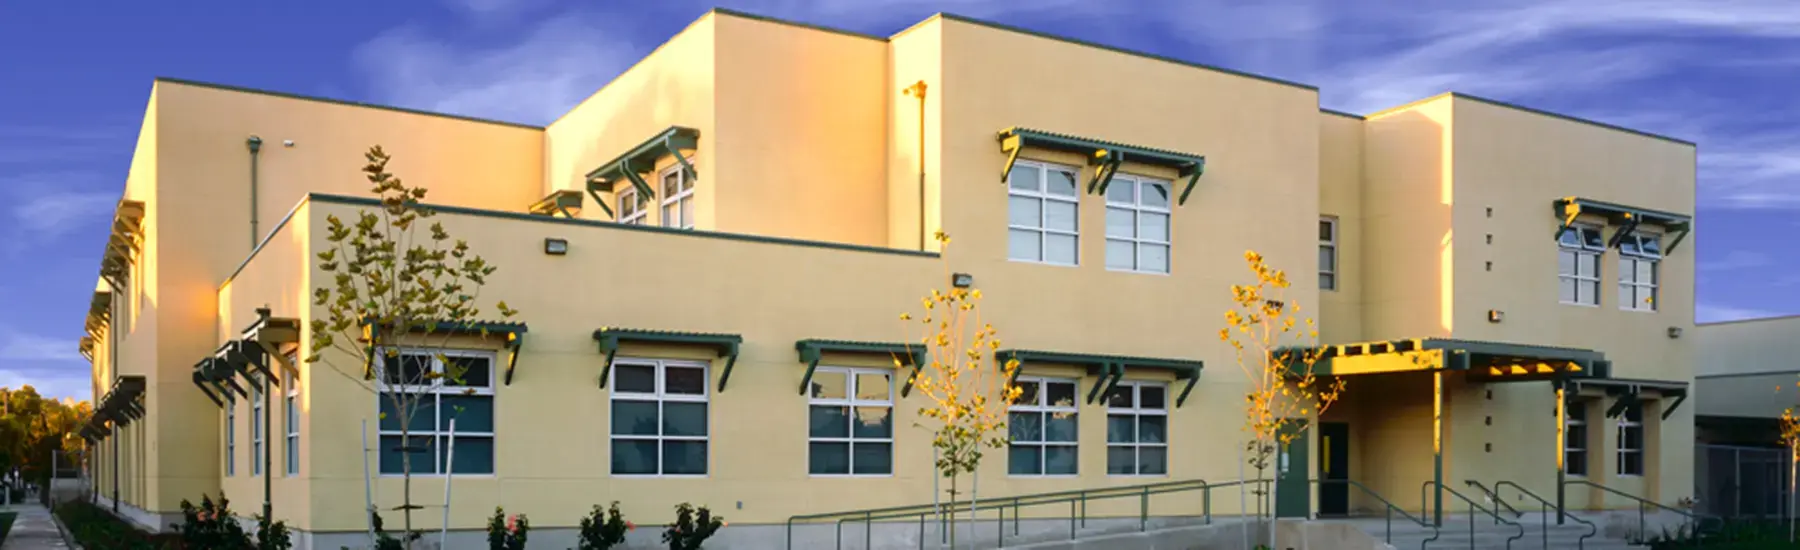 Los Angeles Unified School District - Middleton Primary Center